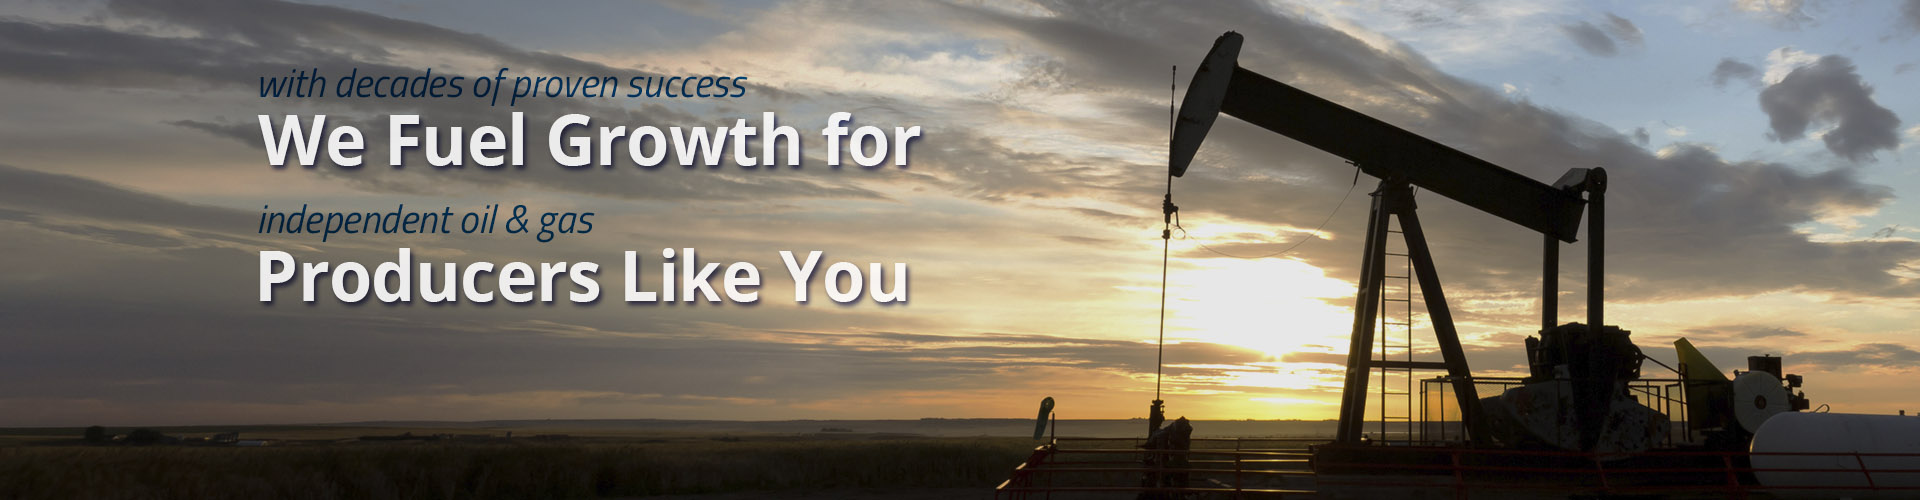 with decades of proven success, we fuel growth for independent oil and gas producers like you